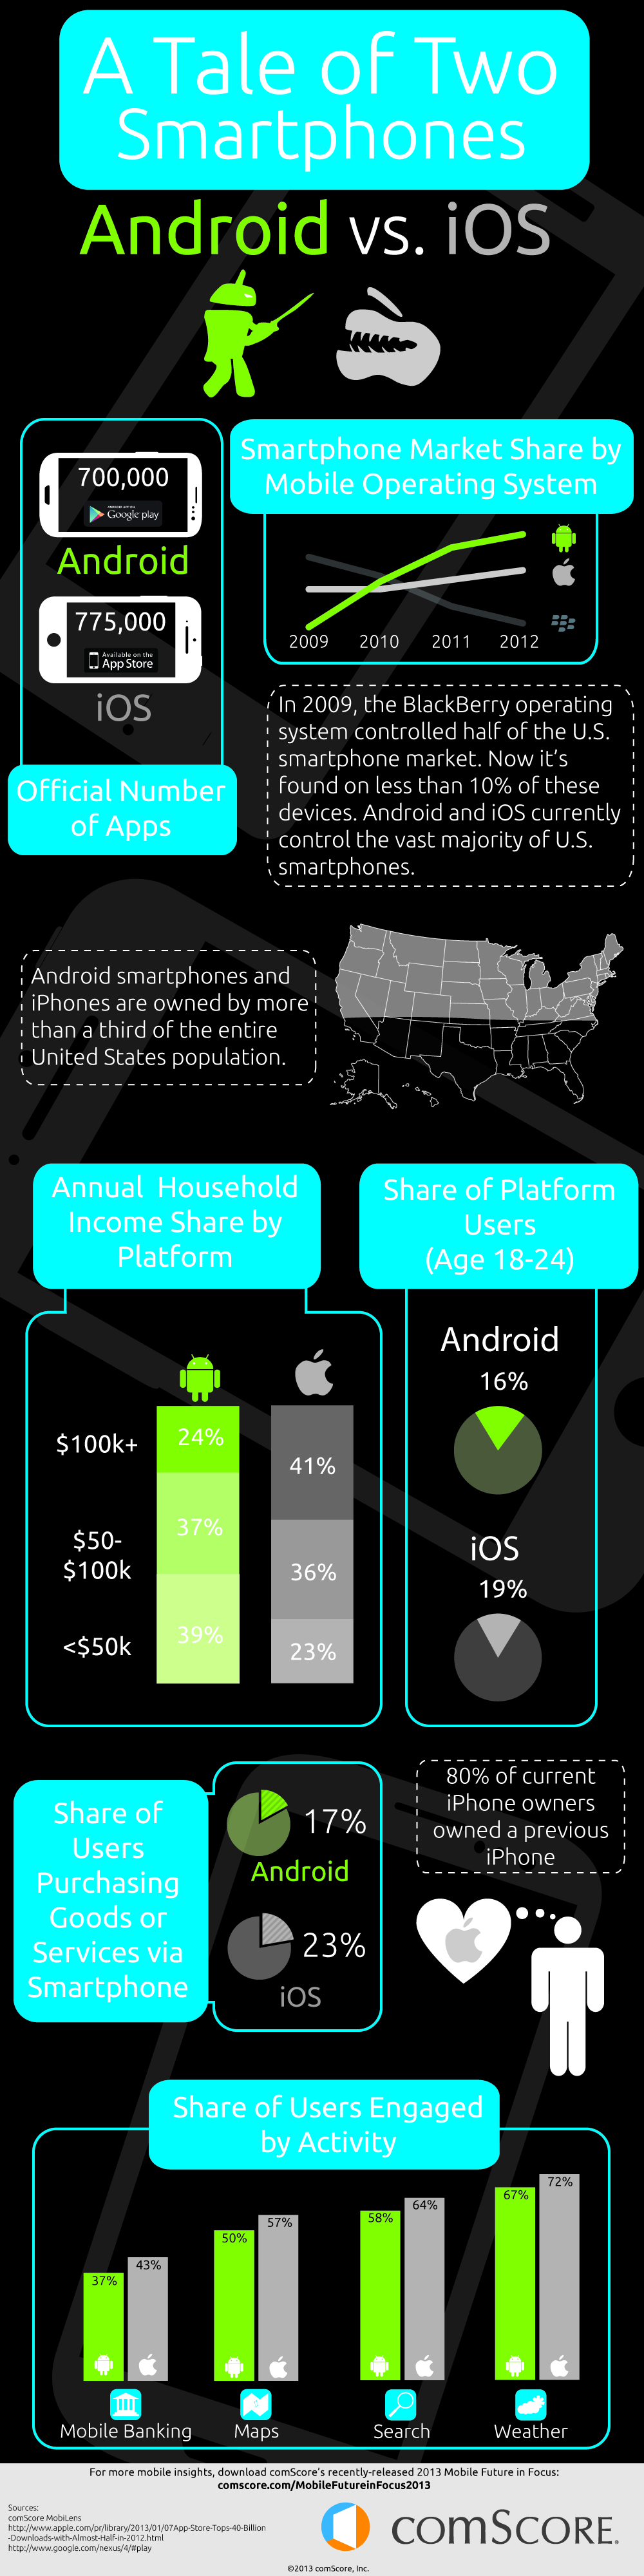 Android_vs_iOS_Infographic_1000x4000.jpg